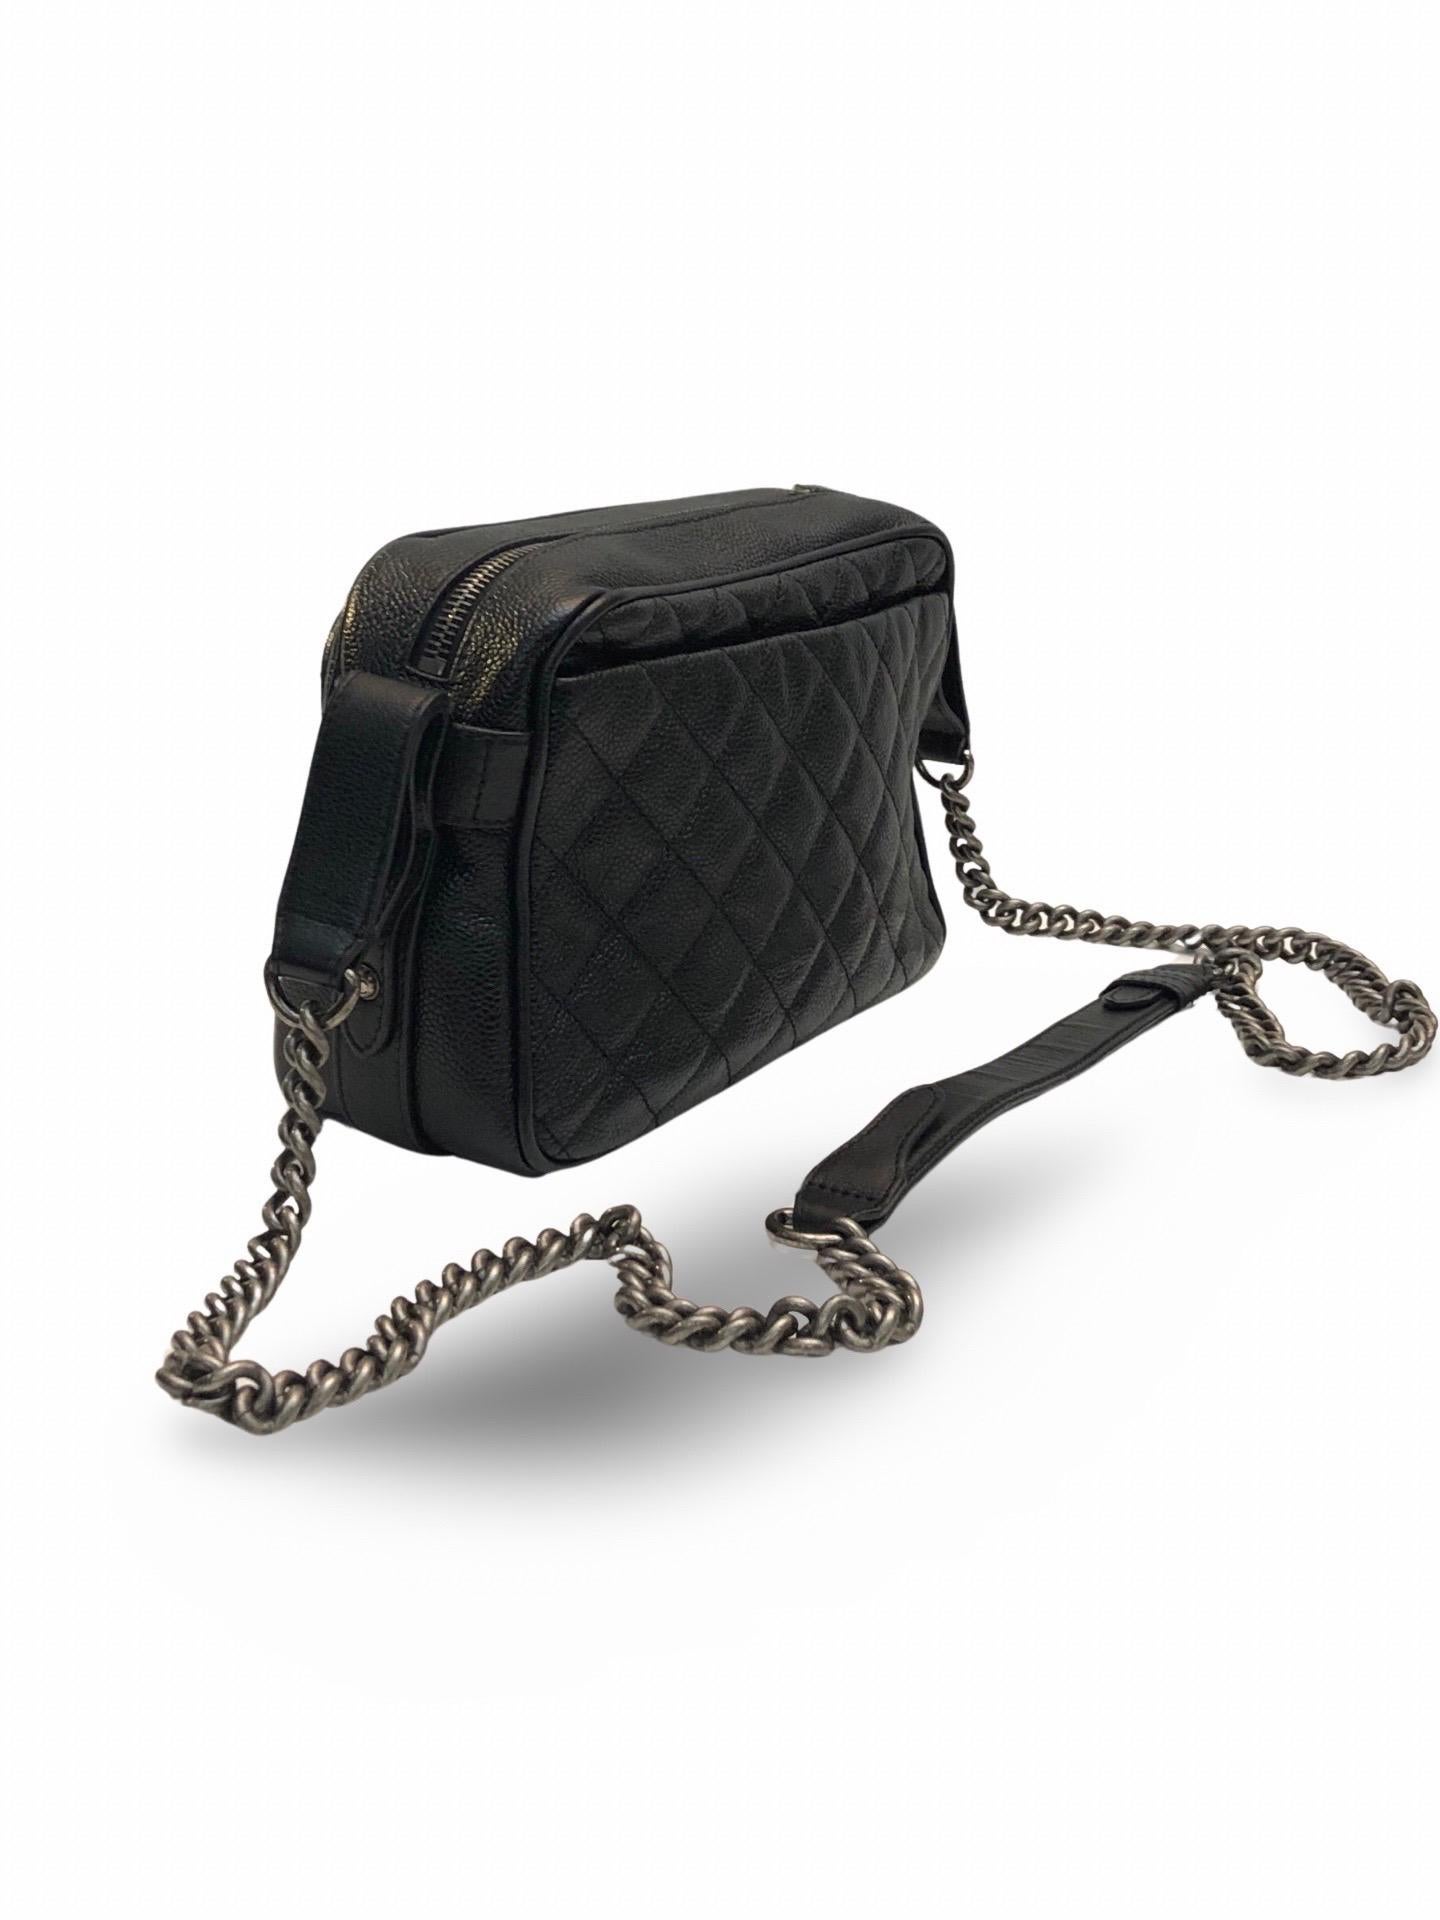 - Chanel black quilted camera bag in signature gourmette chain shoulder strap. 

- Featuring a 